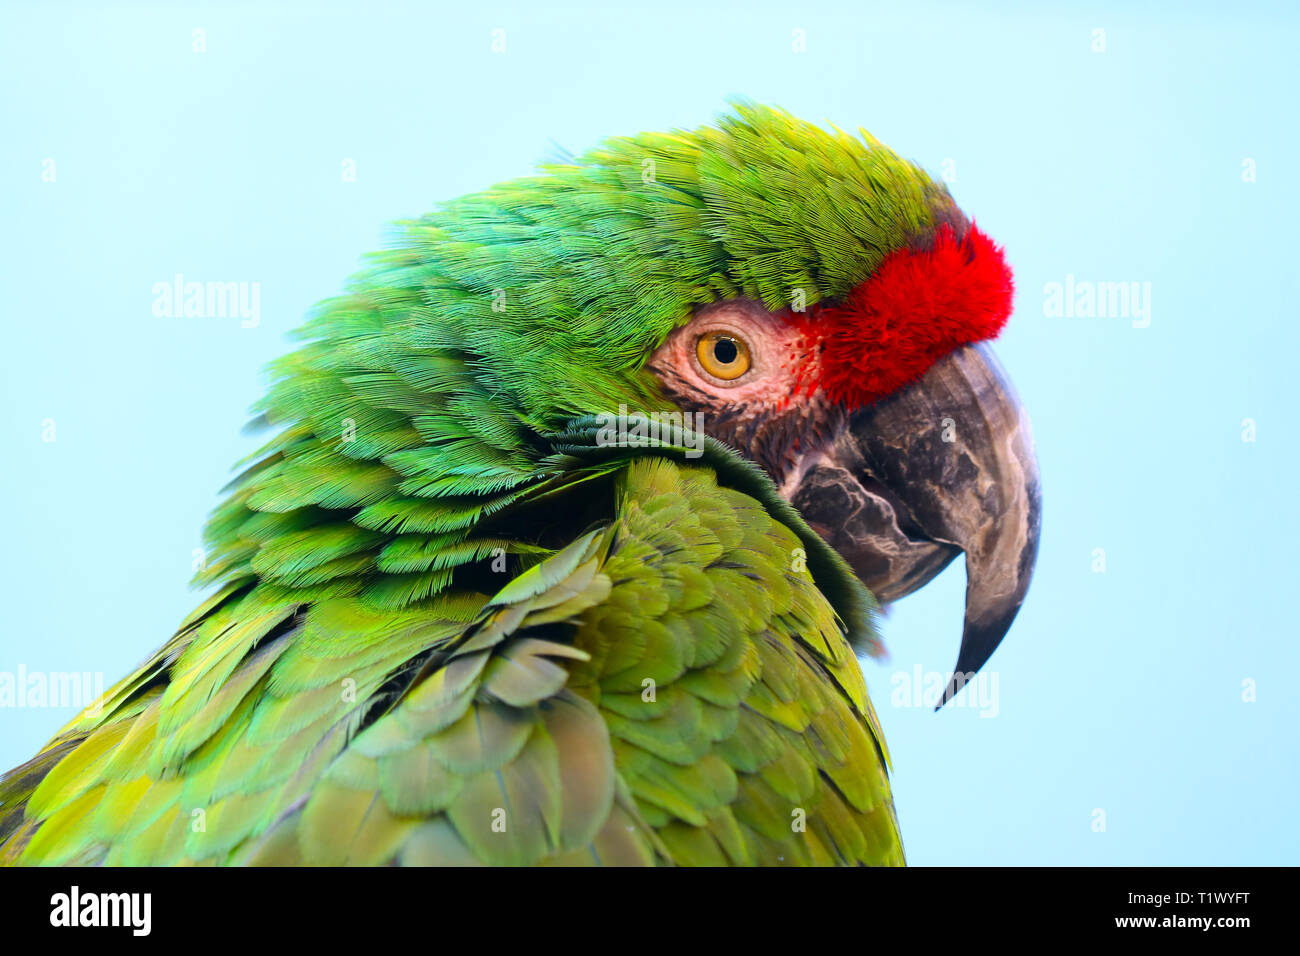 Head of a colorful blue-winged macaw parrot (primolius maracana) in side view in front of a bright blue background Stock Photo